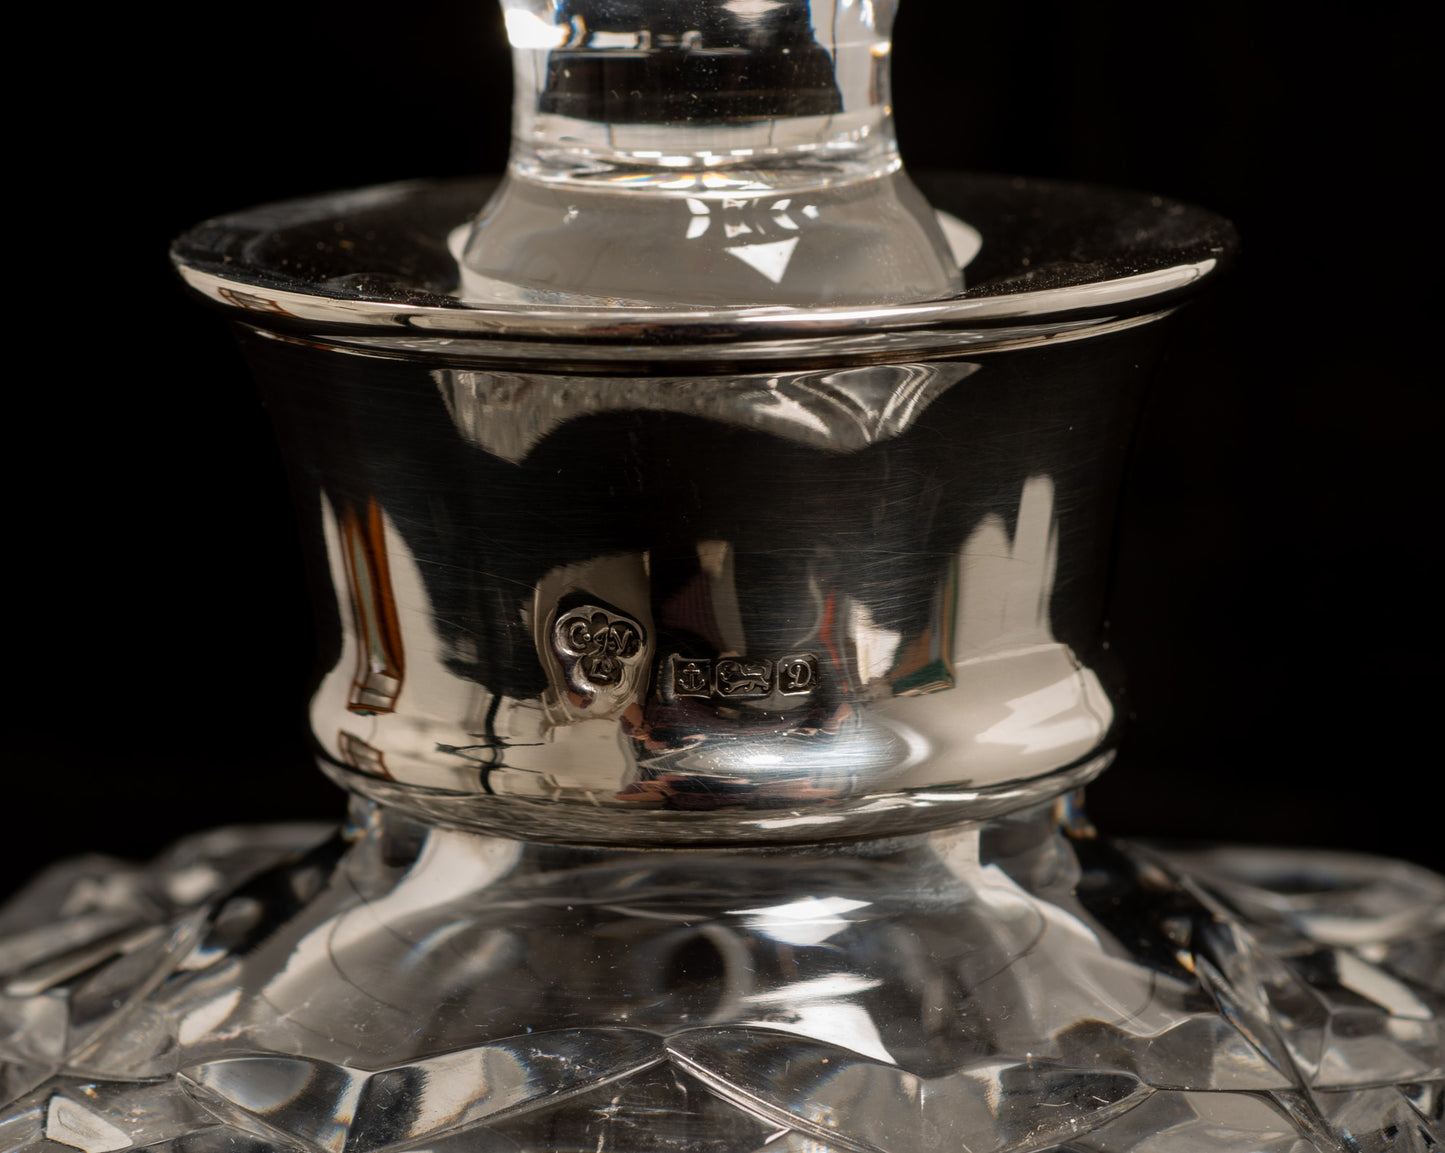 Vintage Cut Lead Crystal Whisky Decanter With Silver Collar - CJ Vander 1978 (Code 2749)